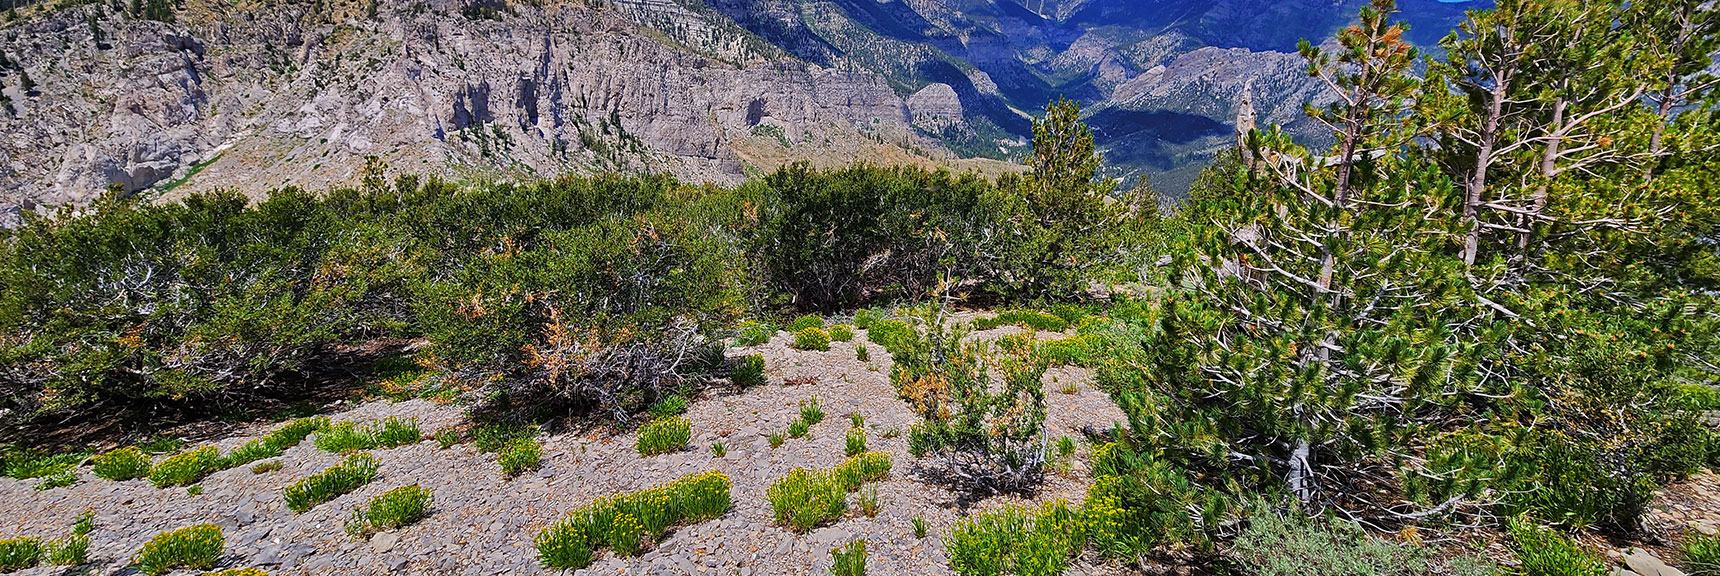 Passing Through Mountain Mahogany and Bristlecone Pines During Descent | Fletcher Canyon Trailhead to Harris Mountain Summit to Griffith Peak Summit Circuit Adventure | Mt. Charleston Wilderness, Nevada